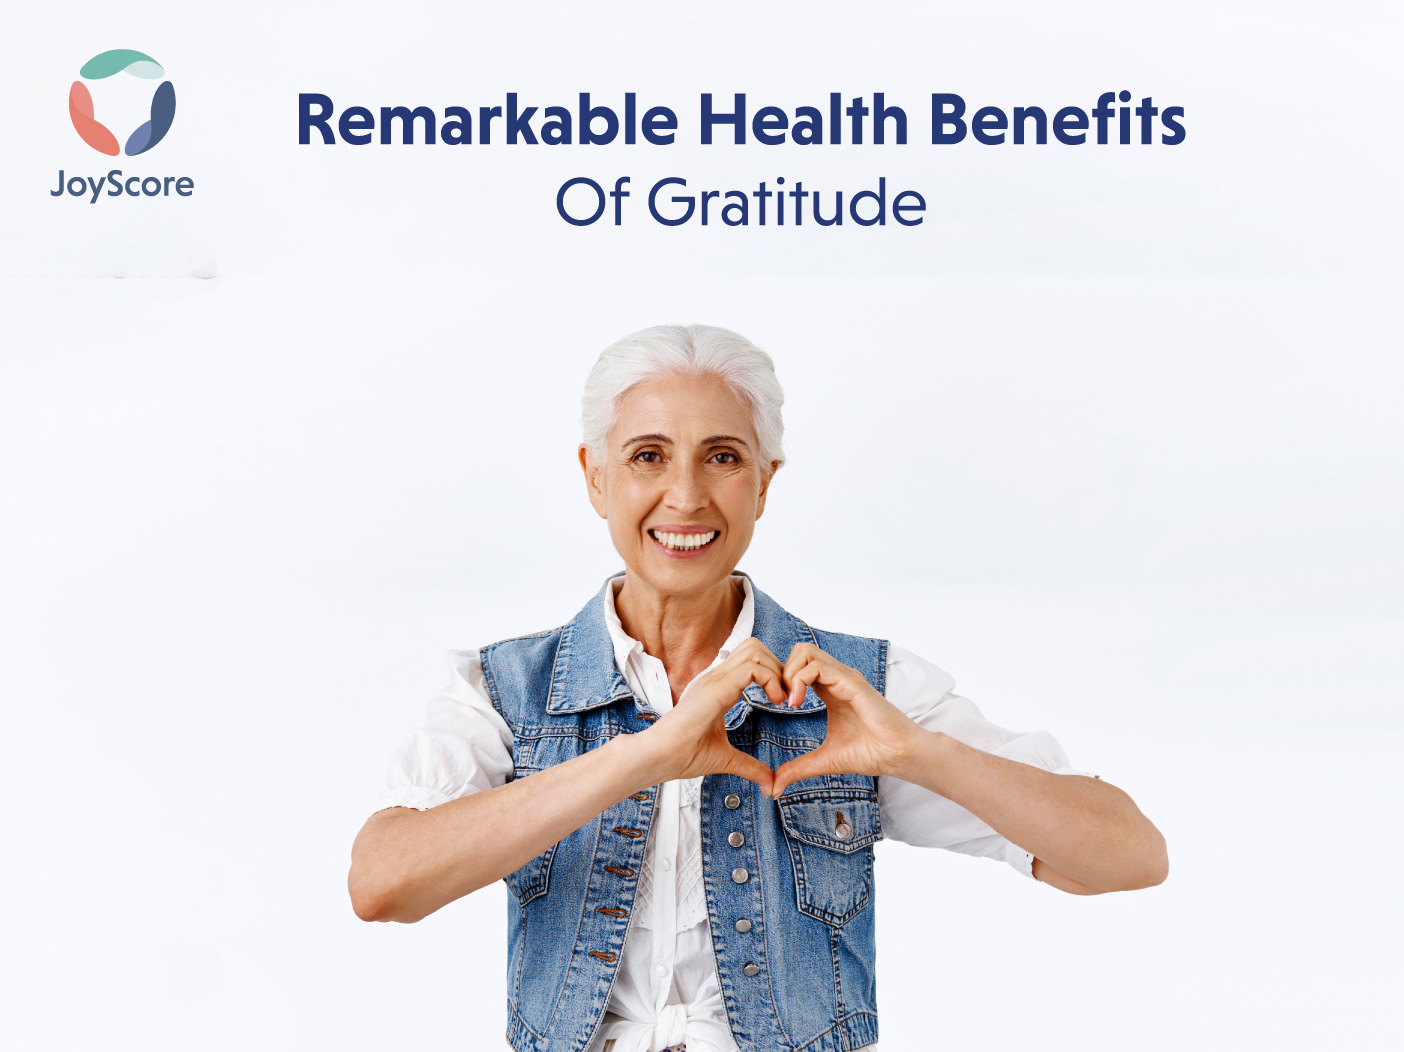 15 Remarkable Health Benefits of Gratitude that you May not Know About